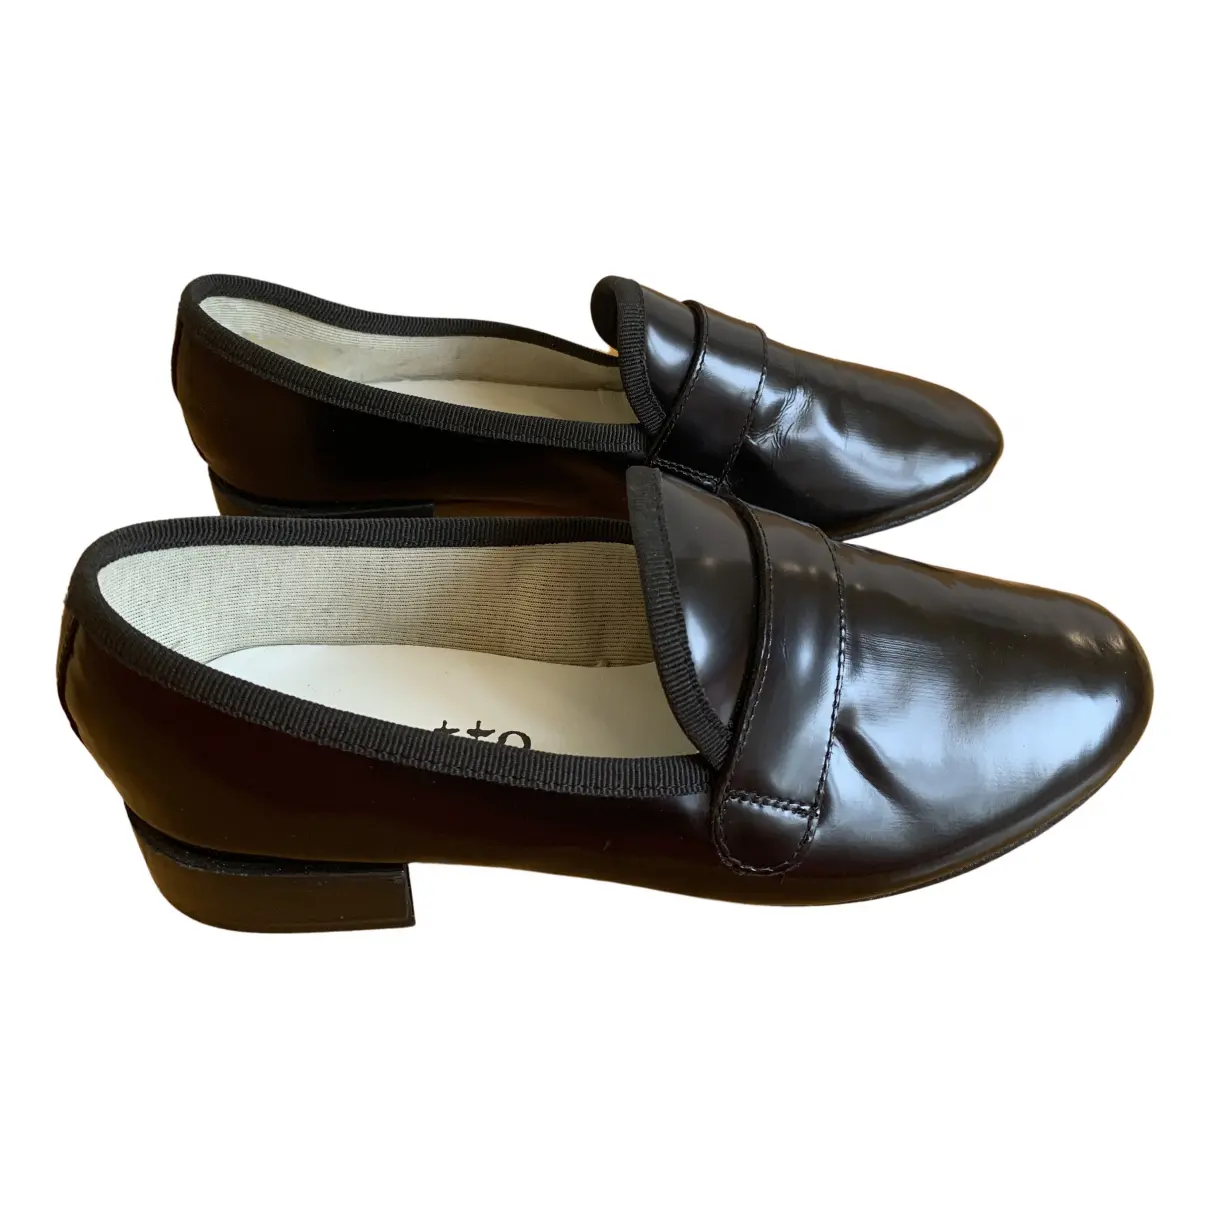 Patent leather flats Repetto